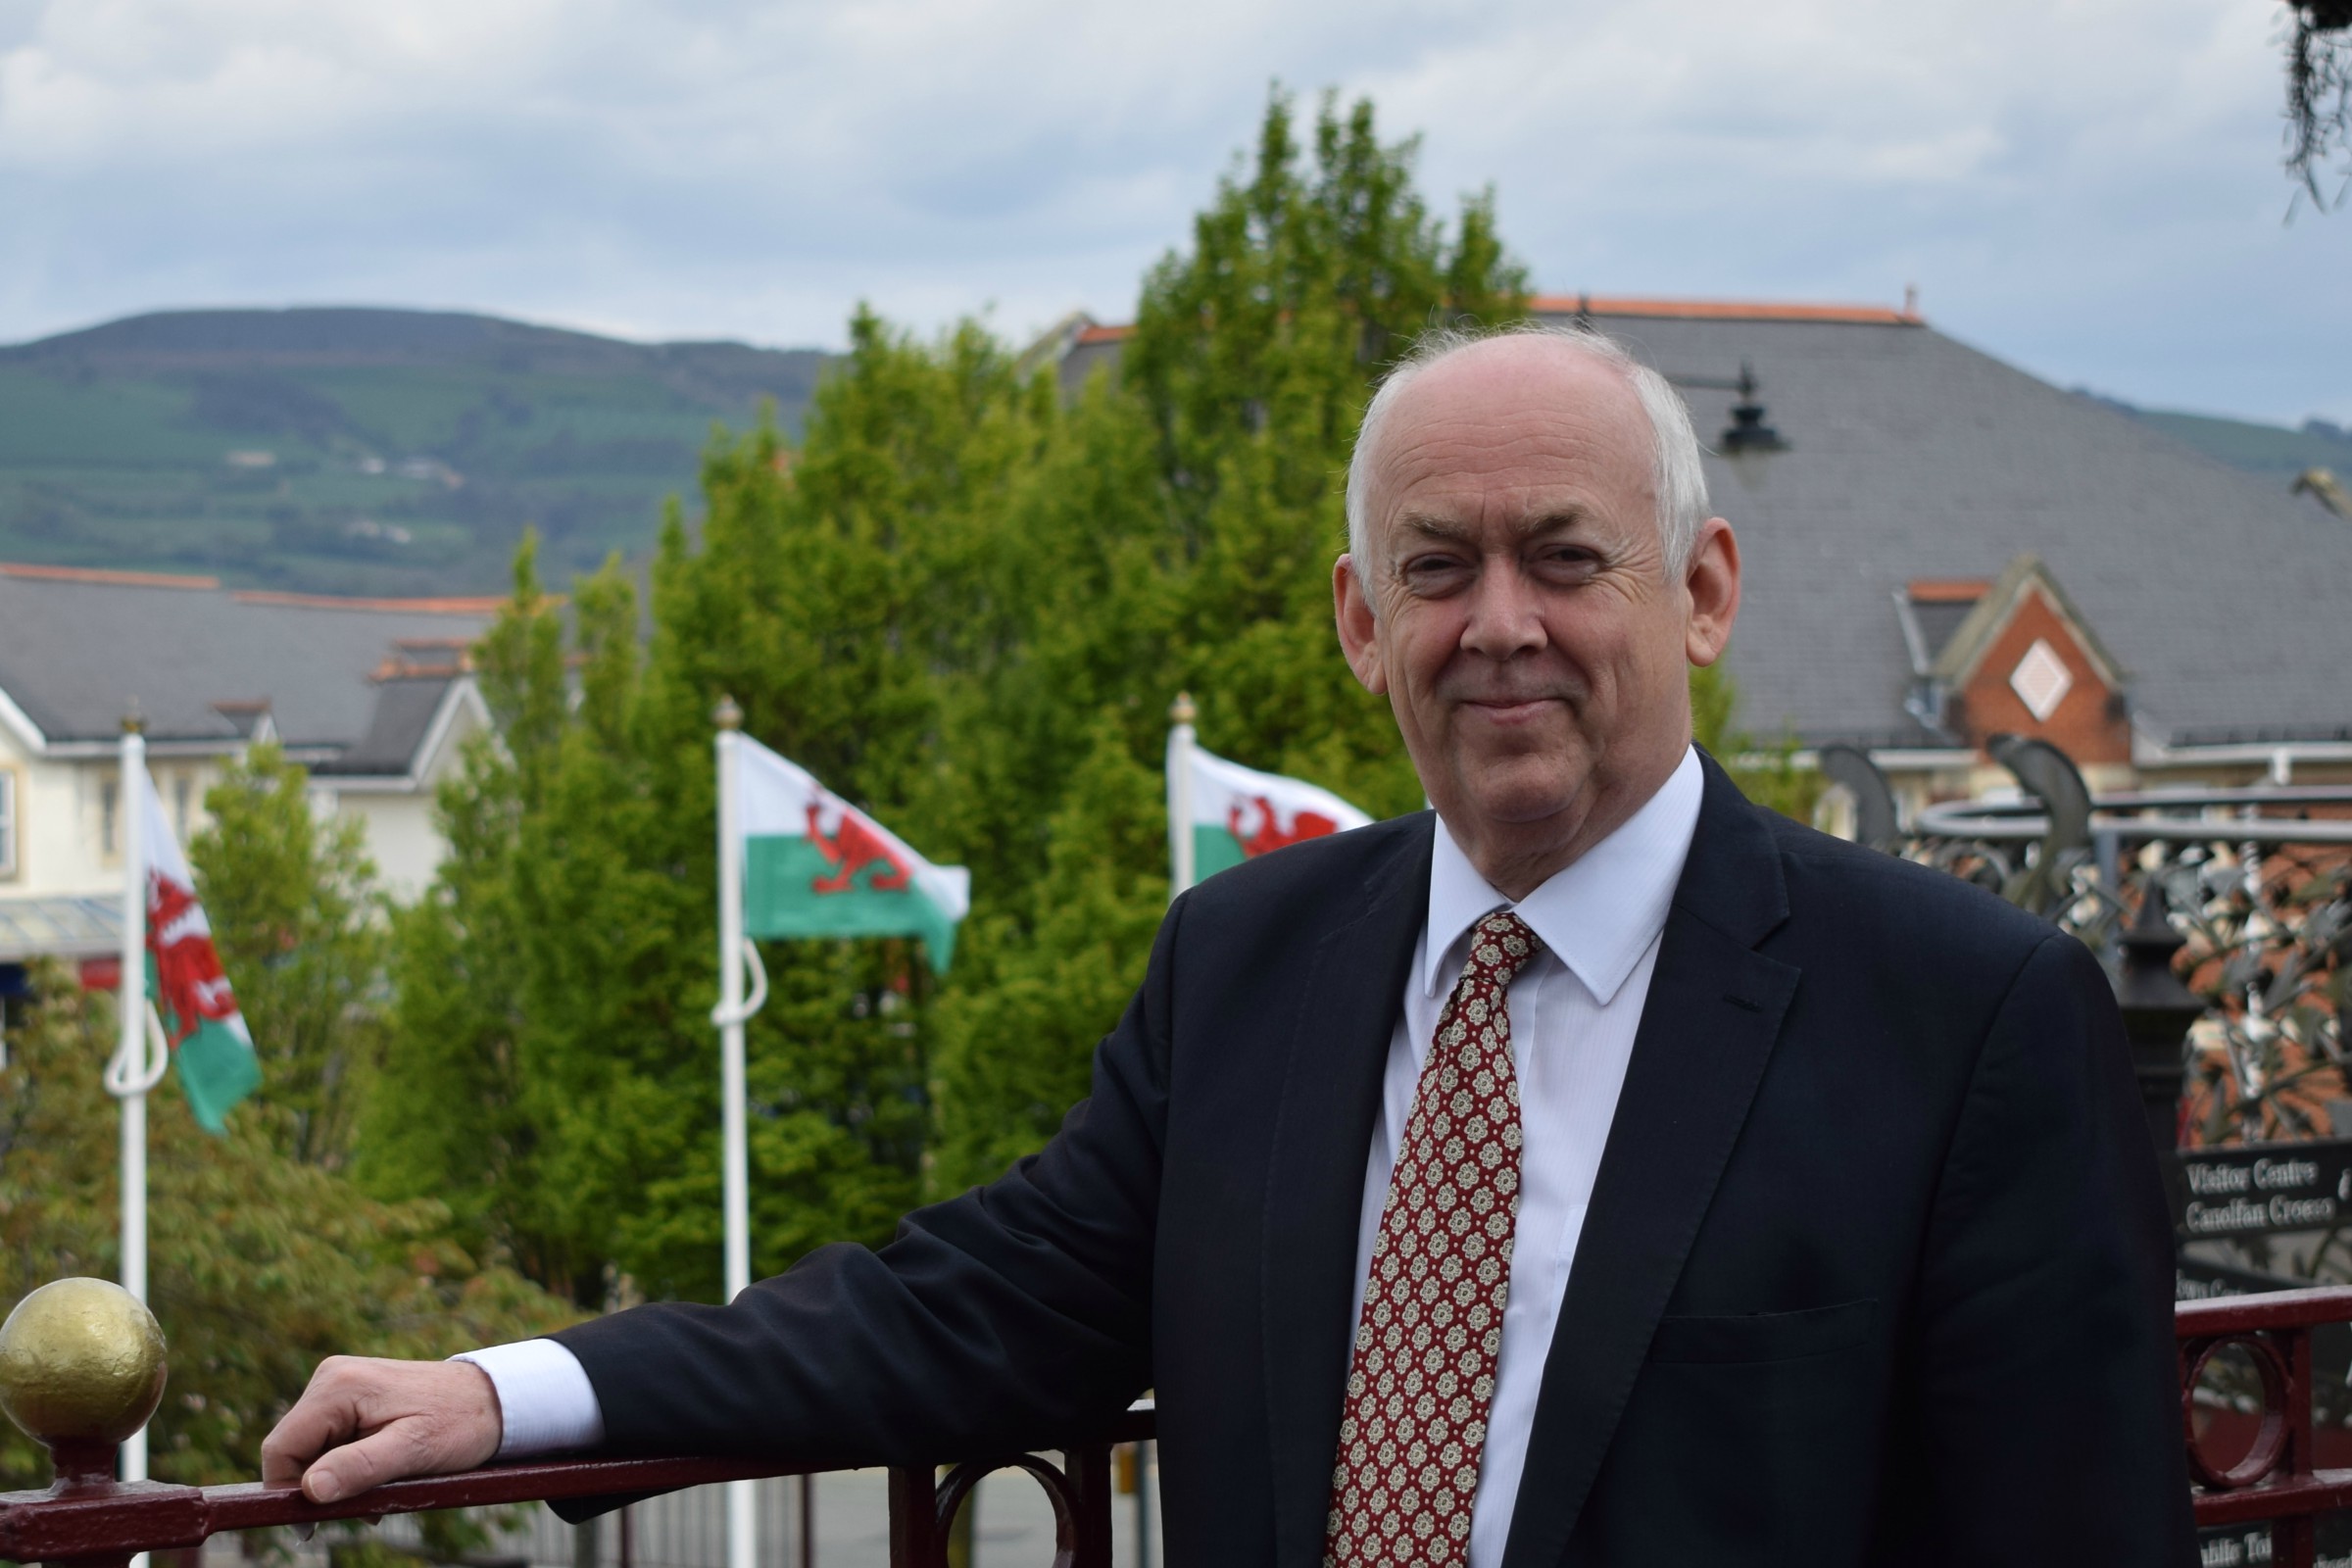 Wayne David is calling on Kautex Textron to protect jobs at their factory in Ystrad Mynach